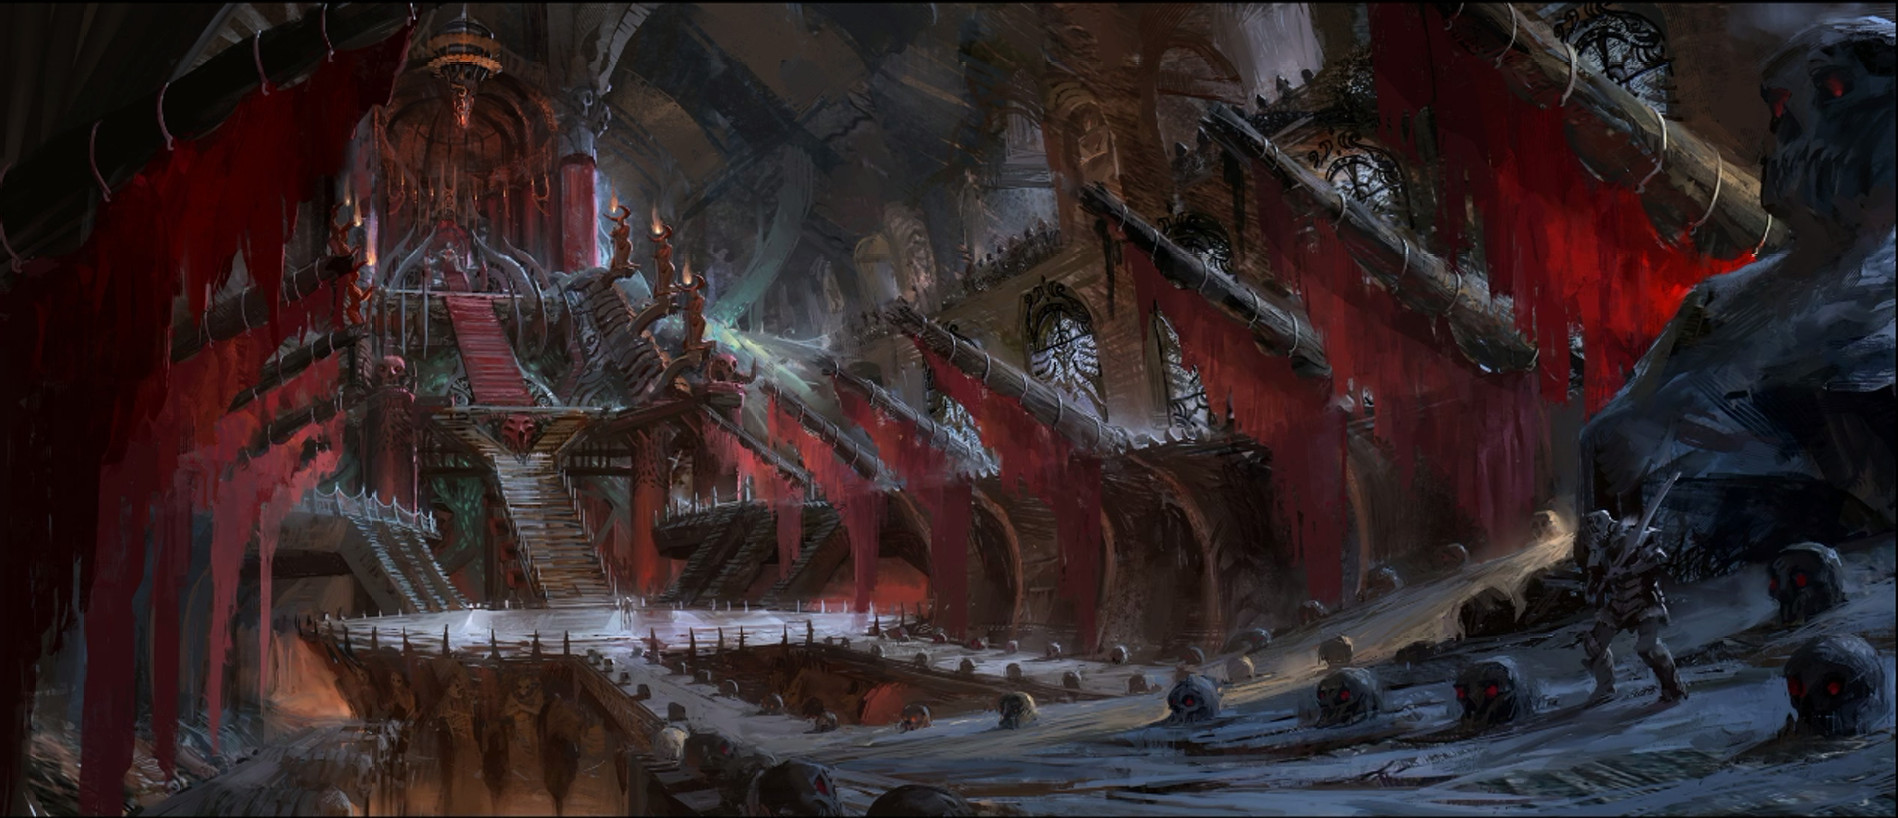 Throne Room God Of War Environment Concept And